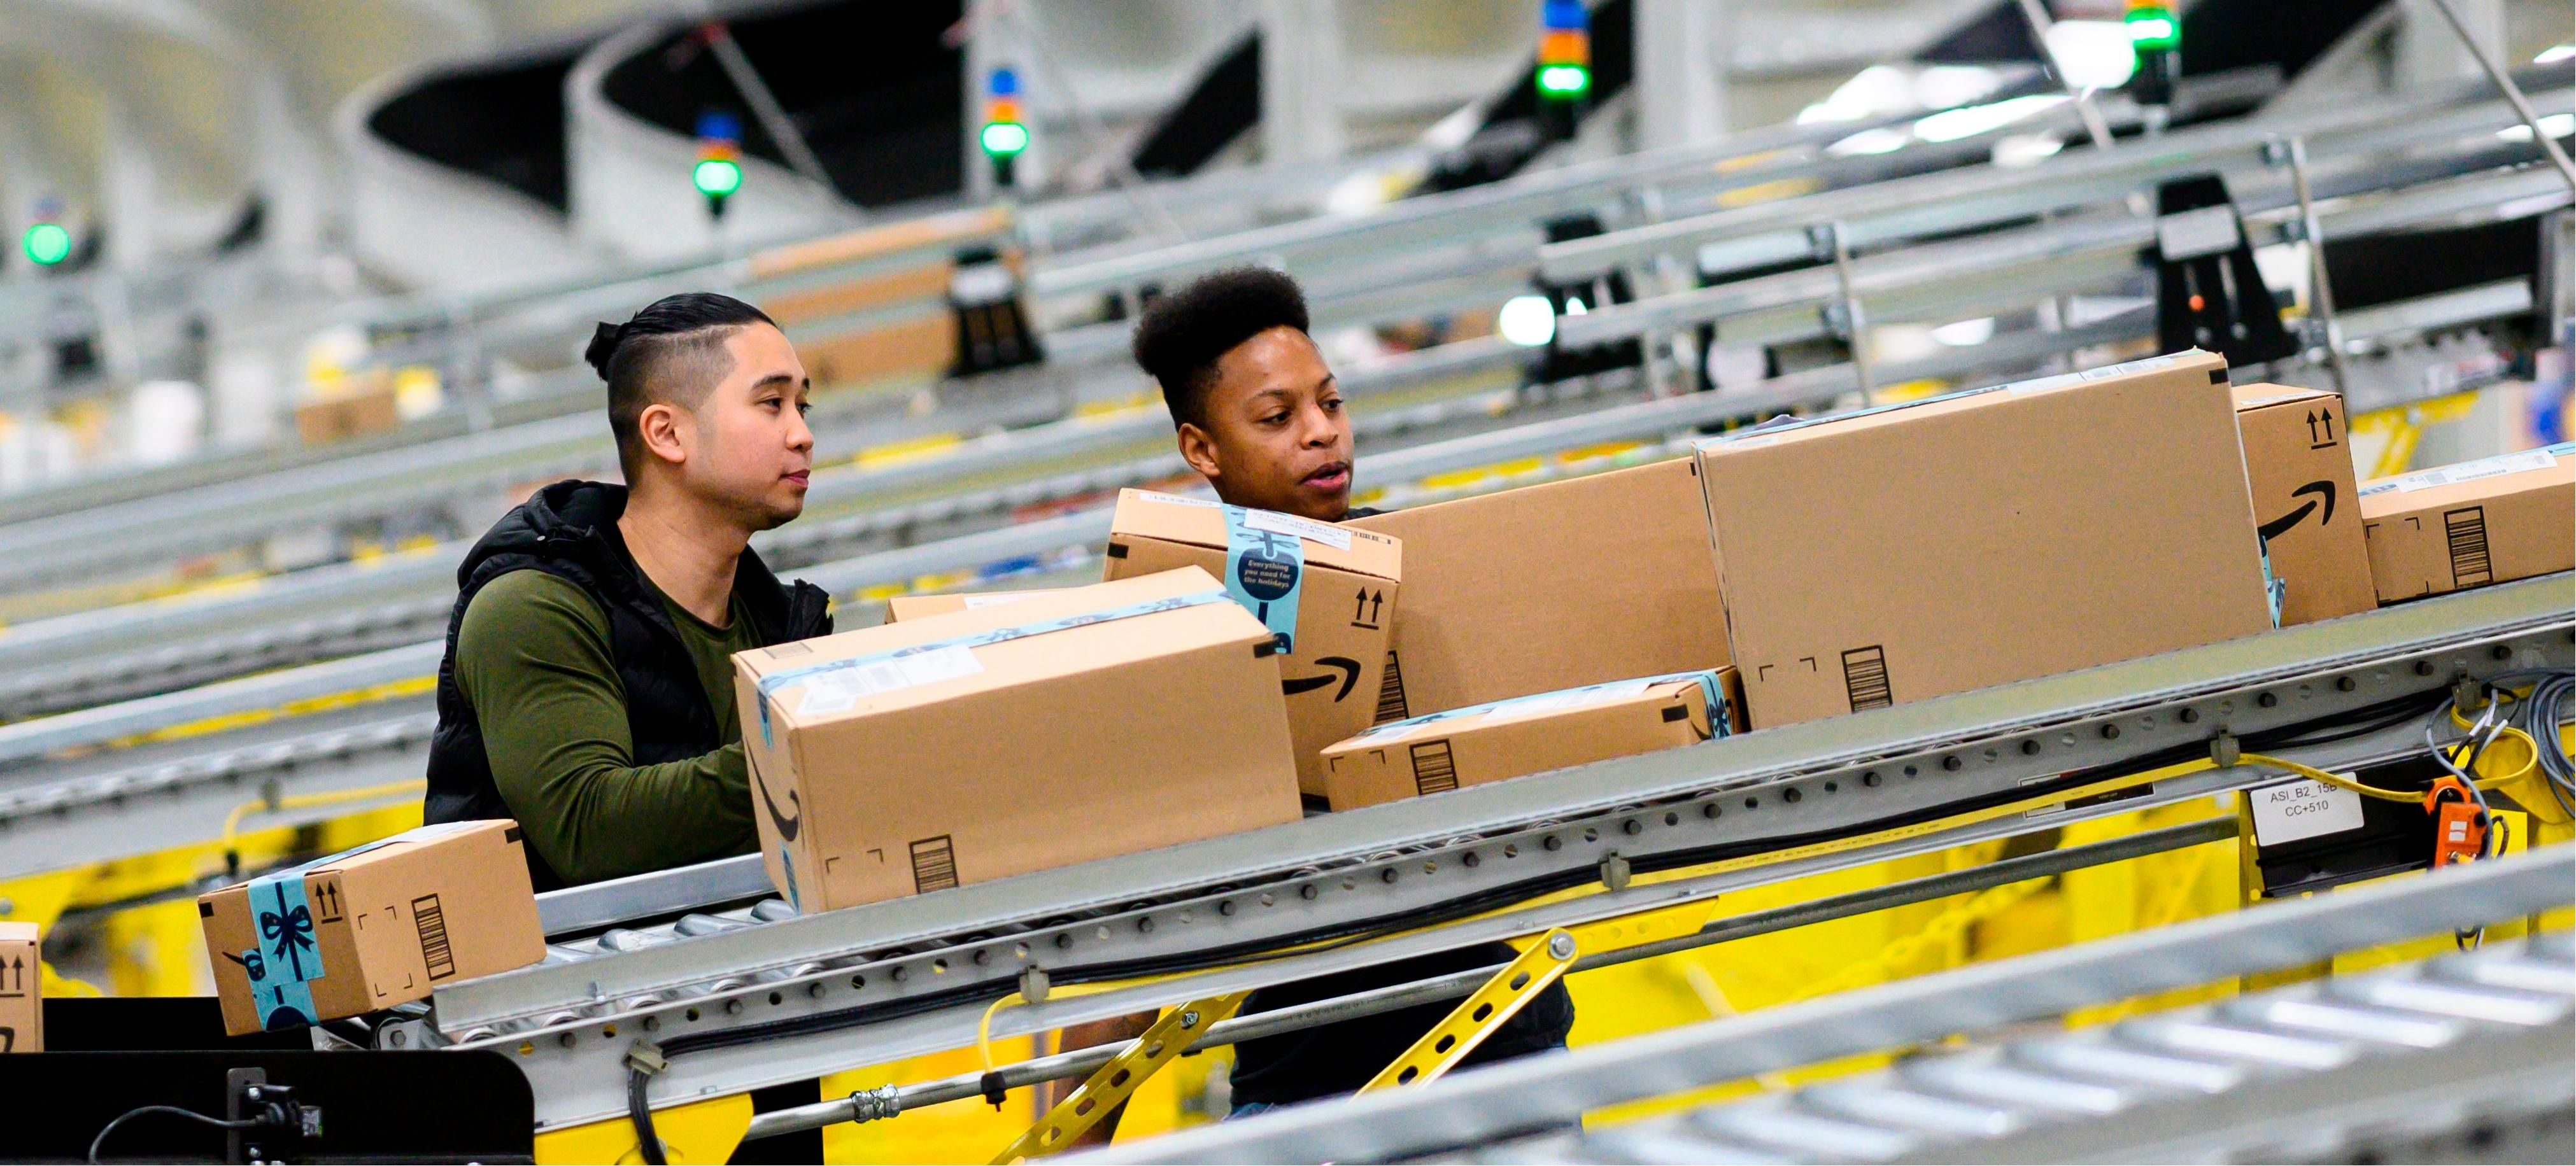 Workers in Amazon fulfilment warehouse